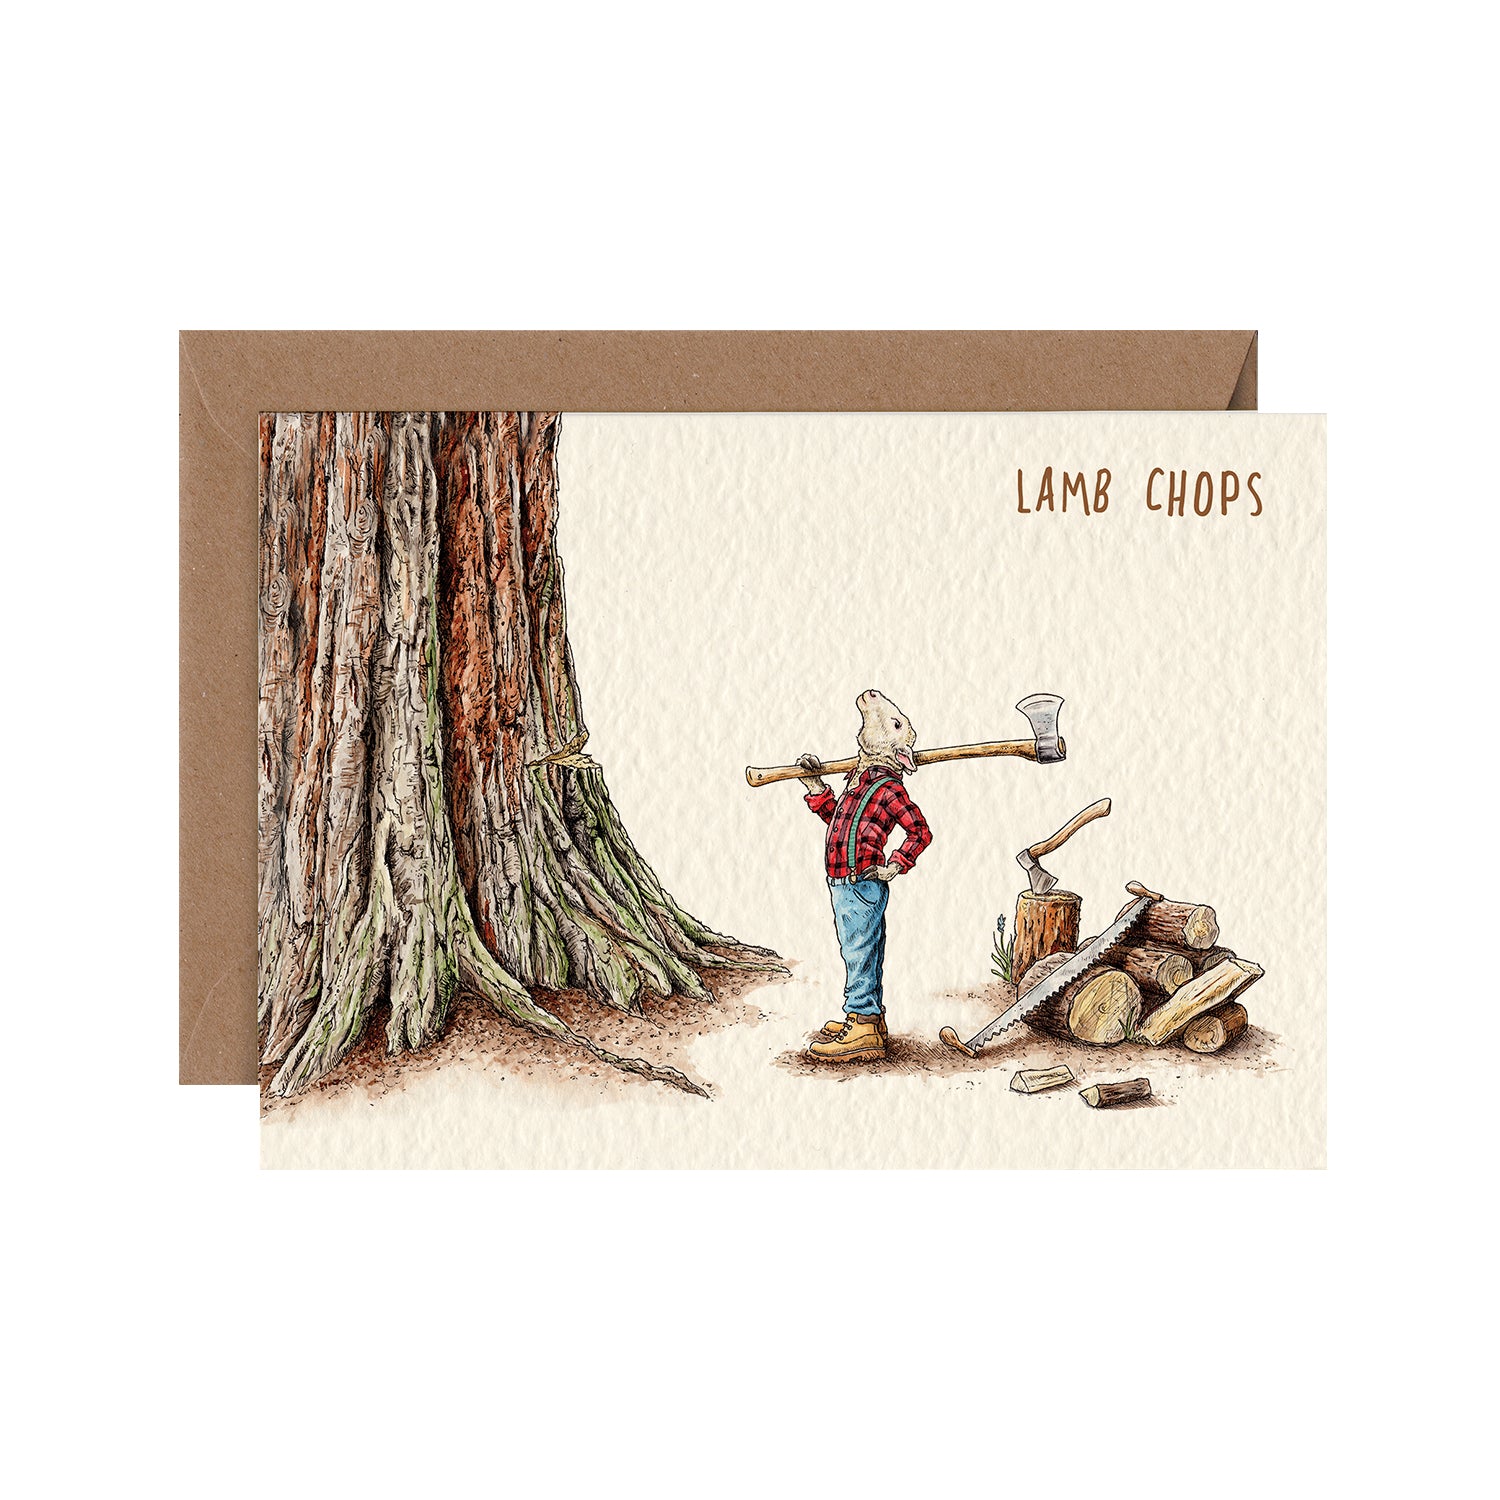 A Lamb Chops Card with a man holding an axe and a tree, created by Hester &amp; Cook.